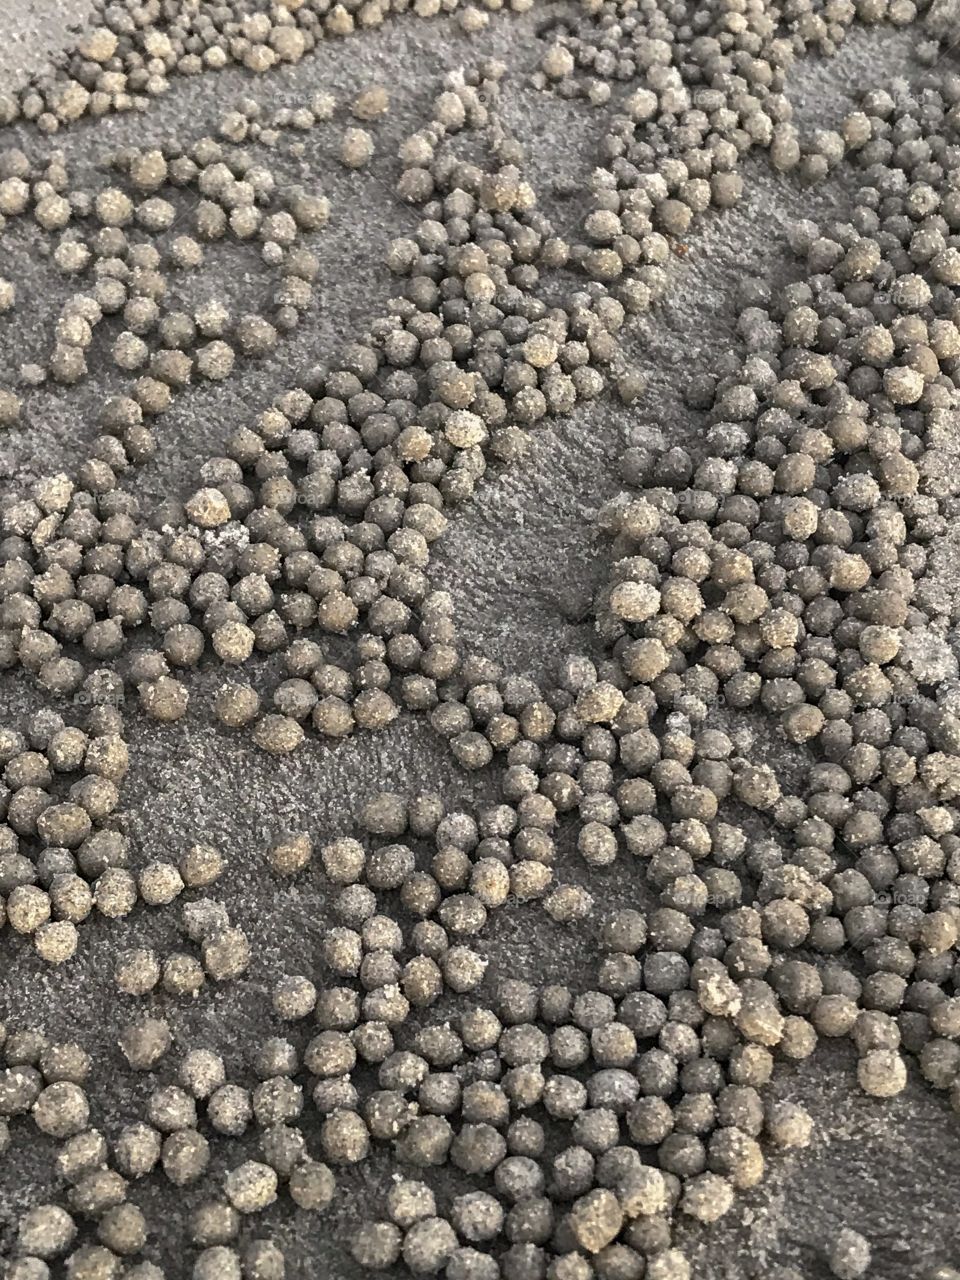 Little pebbles of sand excavated by tiny crabs on a quiet beach 